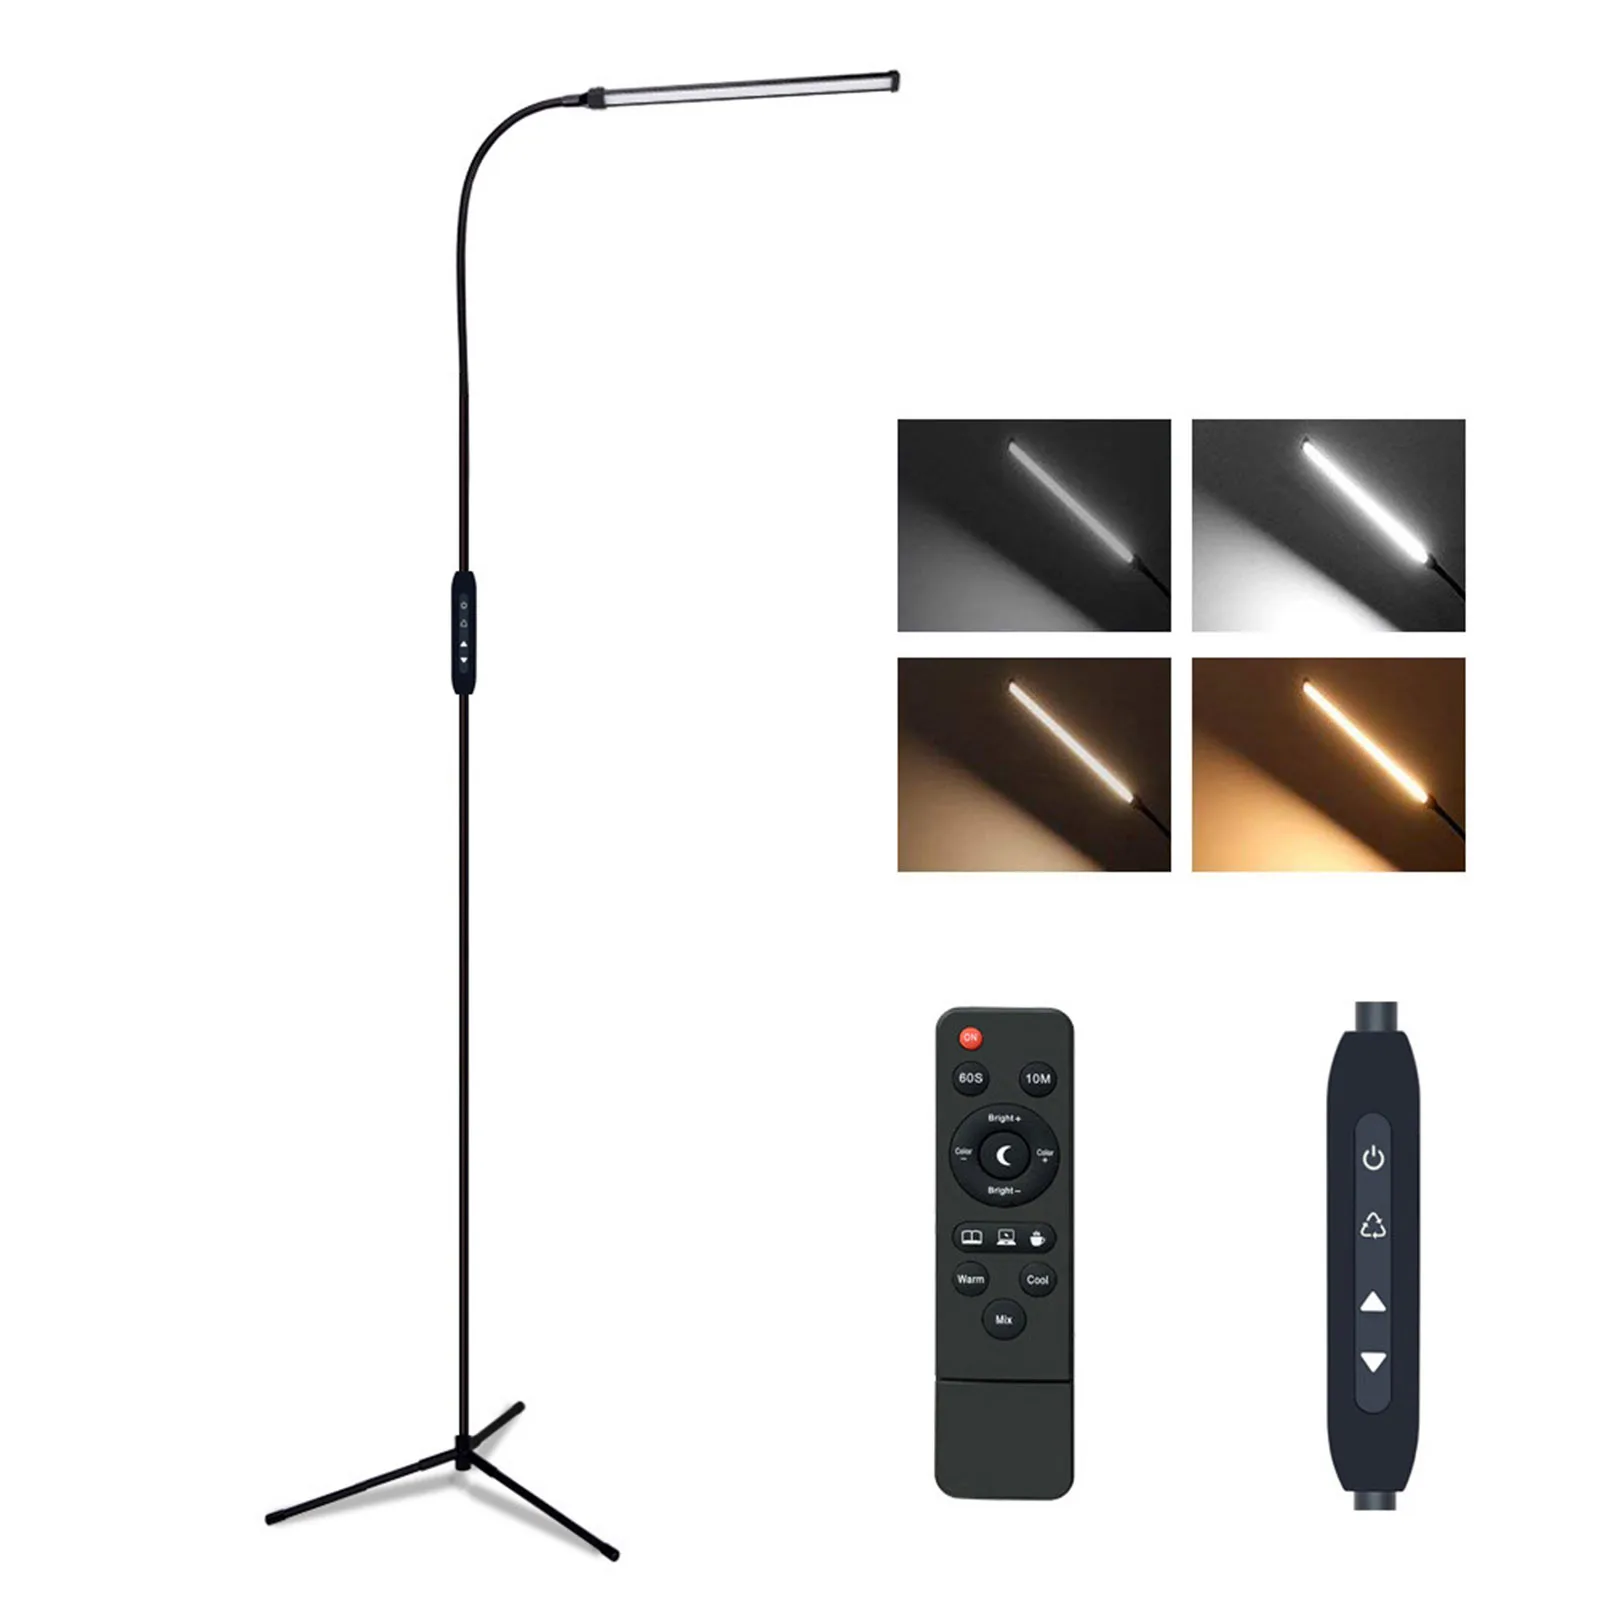 Floor-Lamp Smart Control with Remote Controller Bright Floor Lamps for Living Room Bedroom Office Kids Room